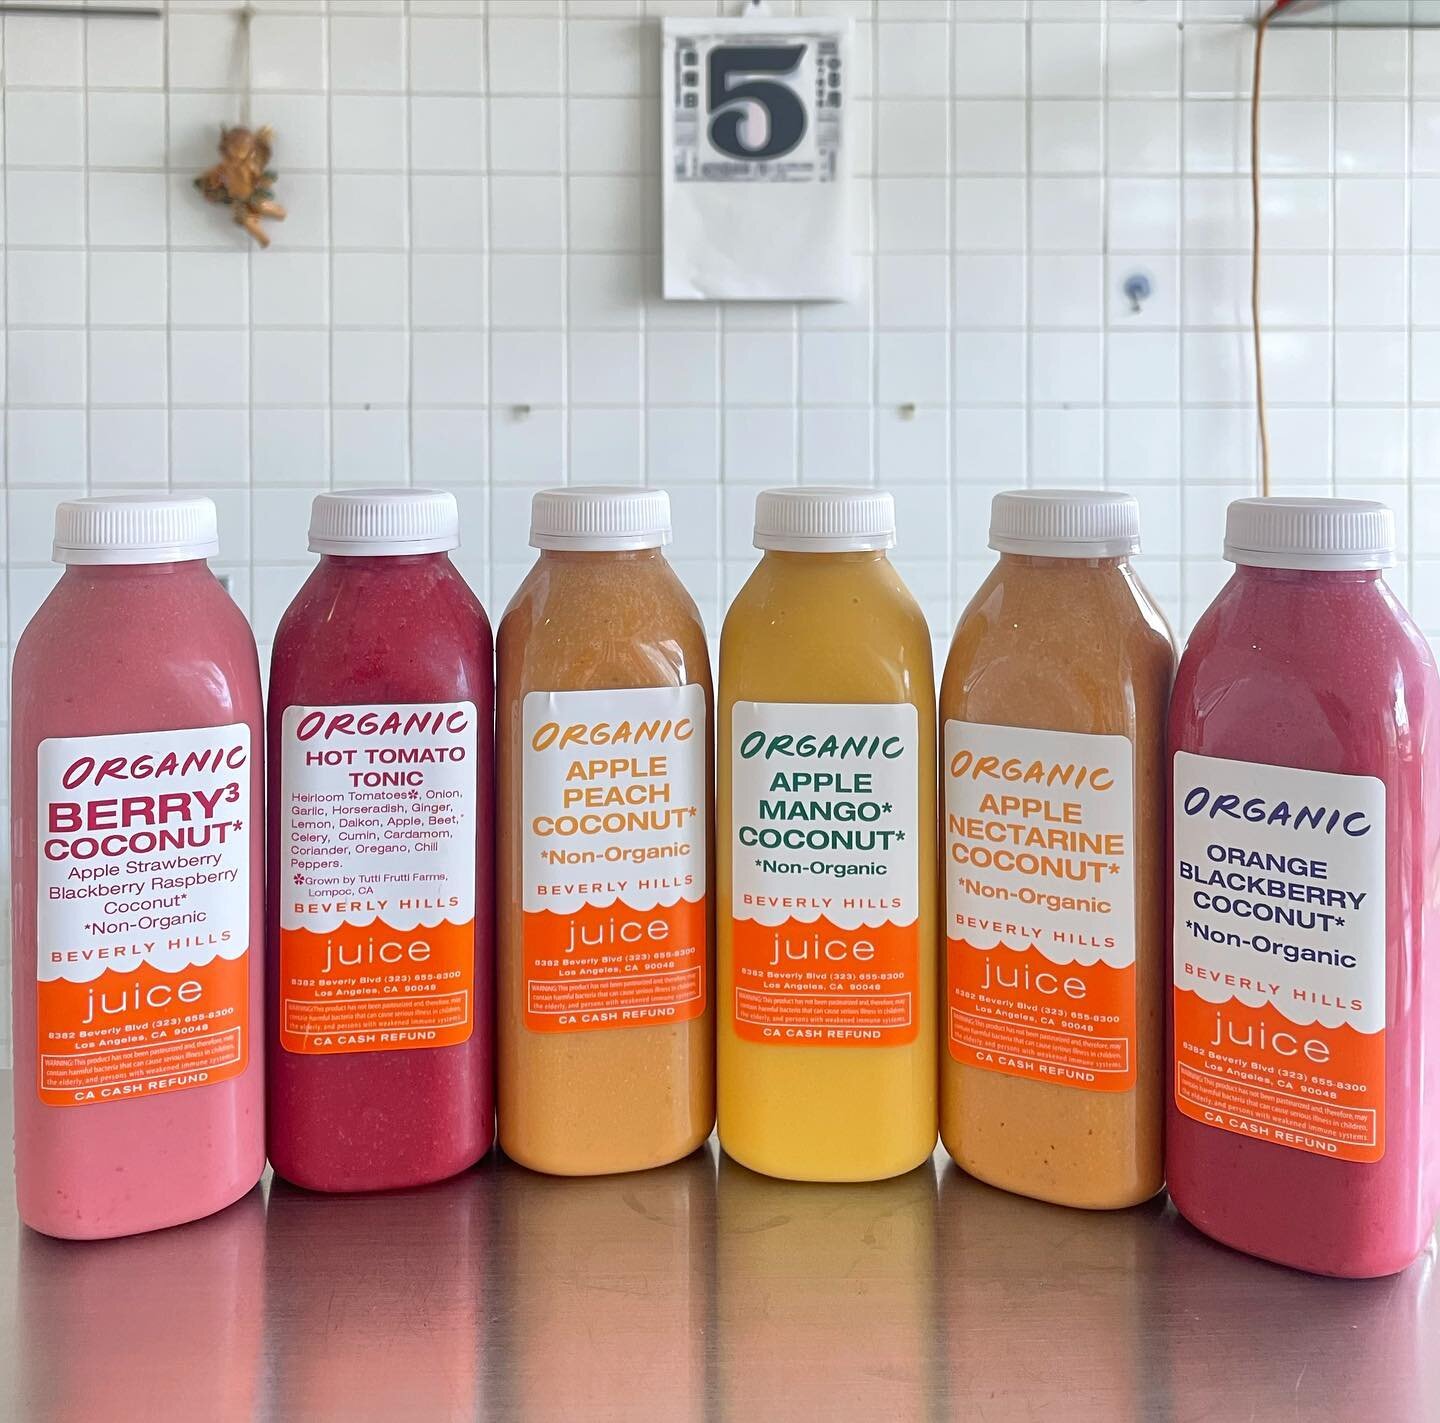 Summer Delights! Come by and grab a delicious juice this weekend! 🍓🍊🥭🍎🍑🥥🍏